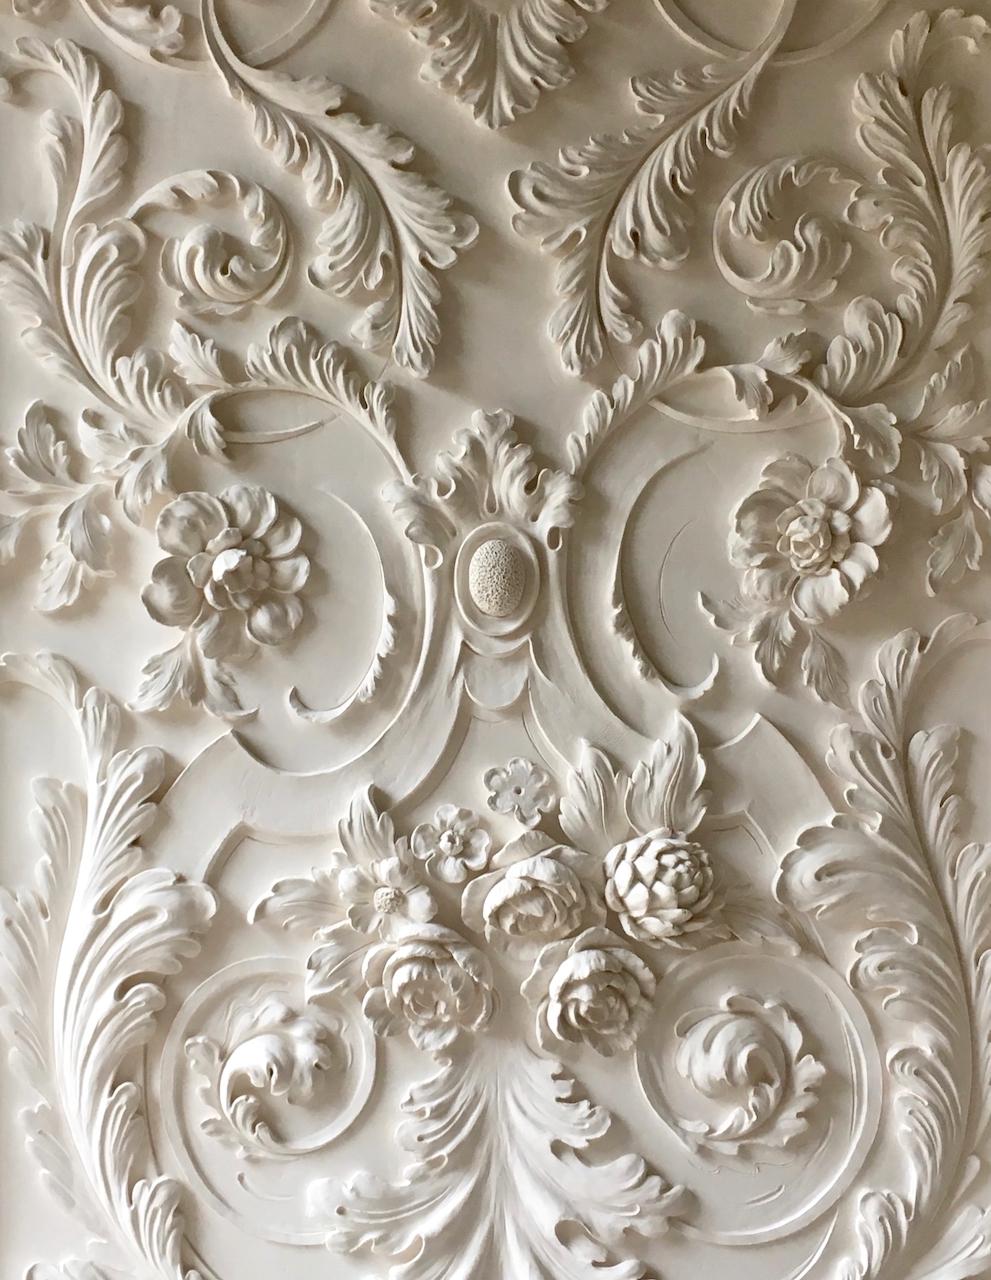 Pair of contemporary floral plaster panels in Baroque style by a Master artist For Sale